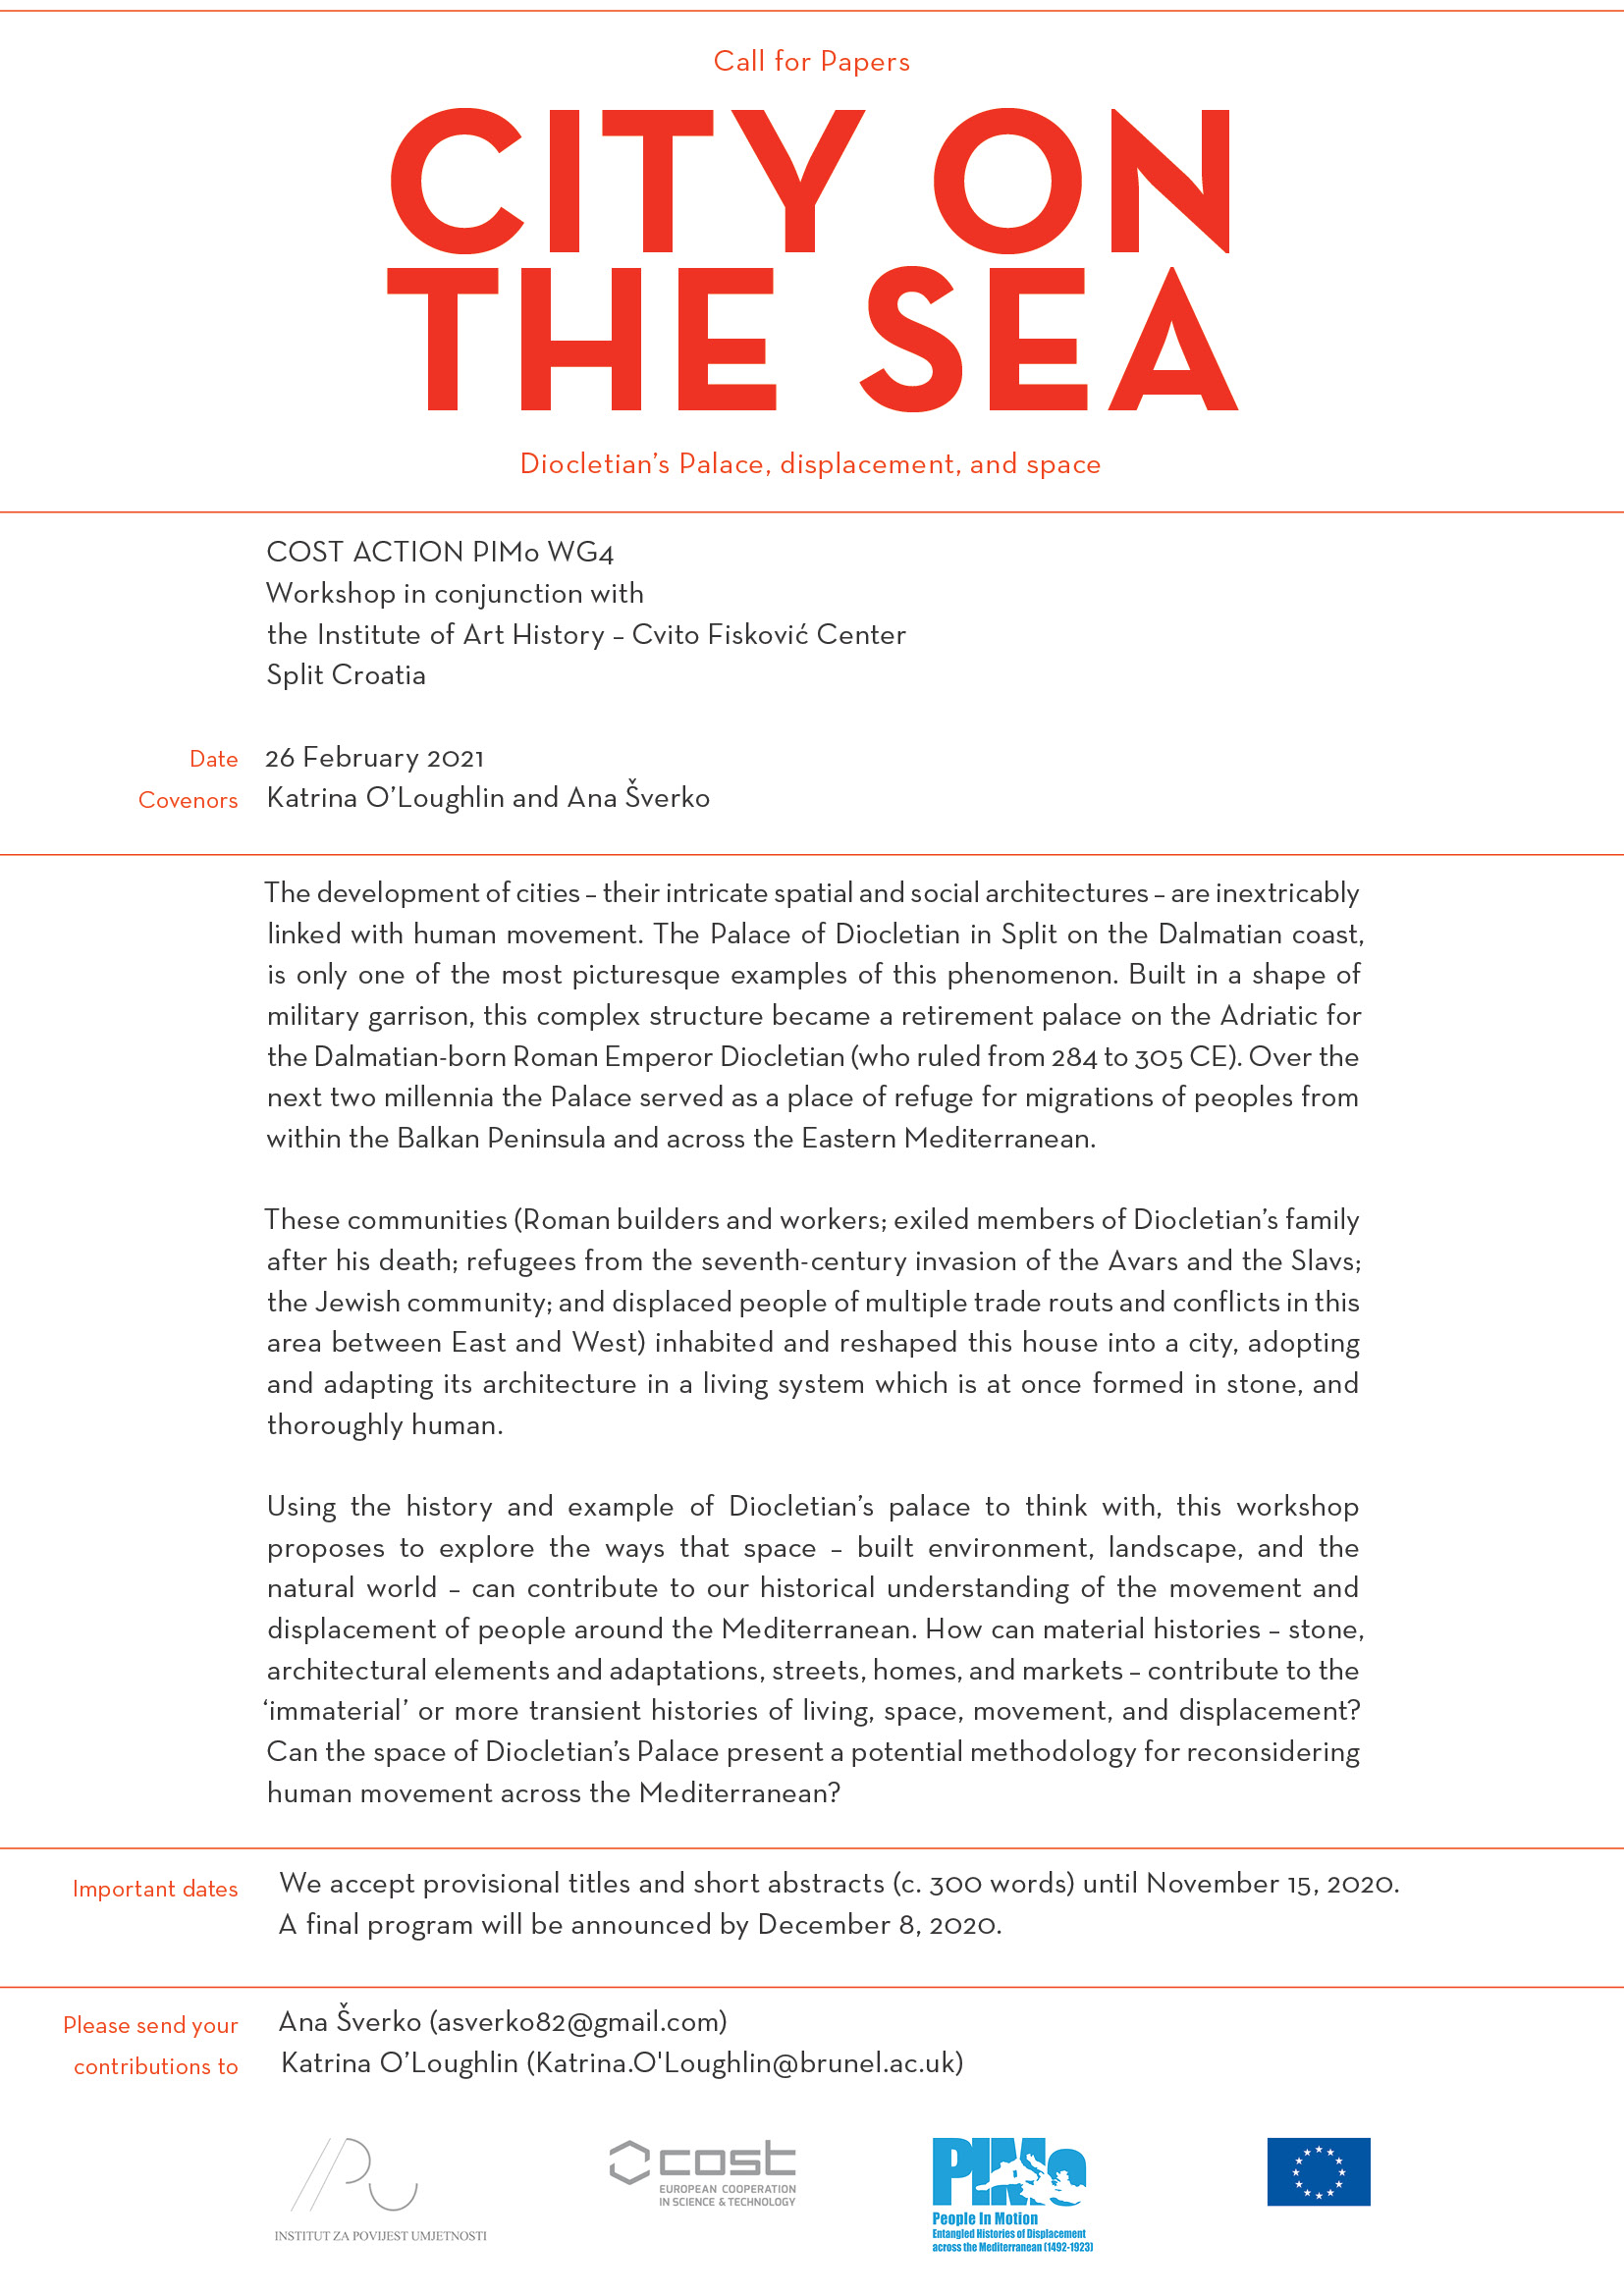 Call for Papers, City on the Sea: Diocletian’s Palace, displacement, and space COST ACTION PIMO WG4 Workshop in conjunction with the Institute of Art History – Cvito Fisković Center, Split Croatia, 26 February 2021.